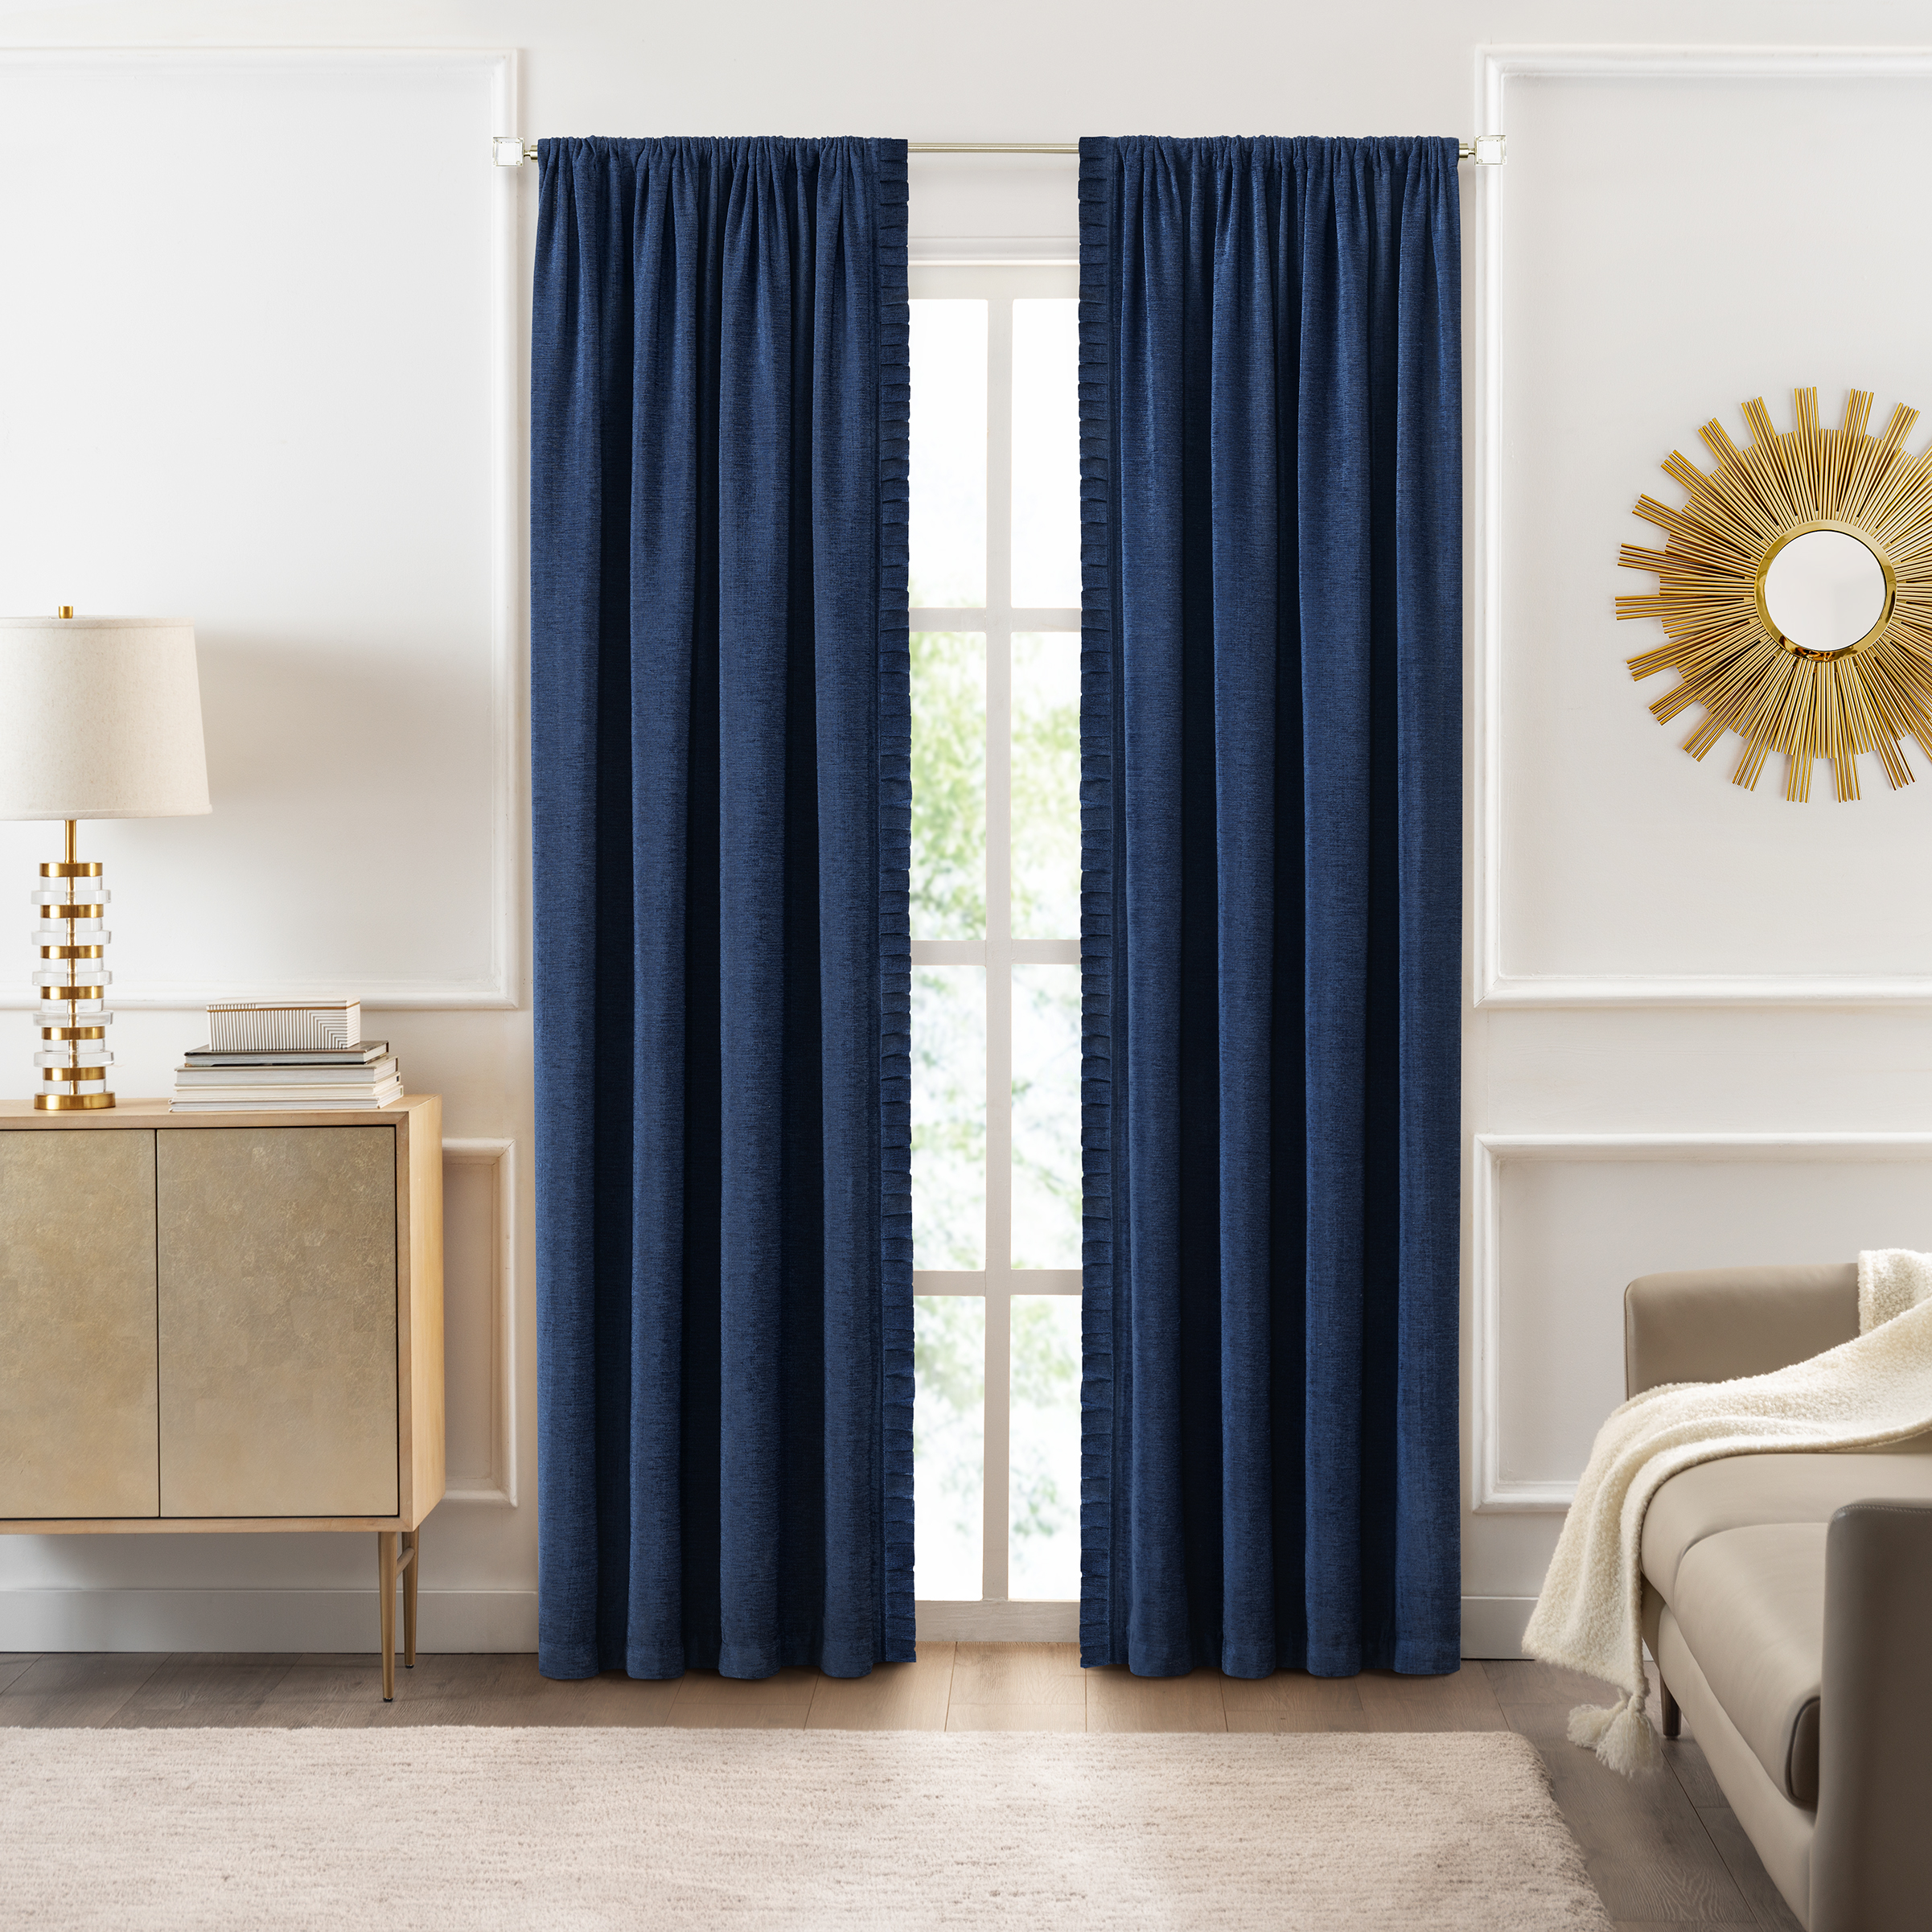 Achim Bordeaux Indoor Polyester Light Filtering Solid Curtain Panel, Navy, 52-in W x 63-in L - image 4 of 7